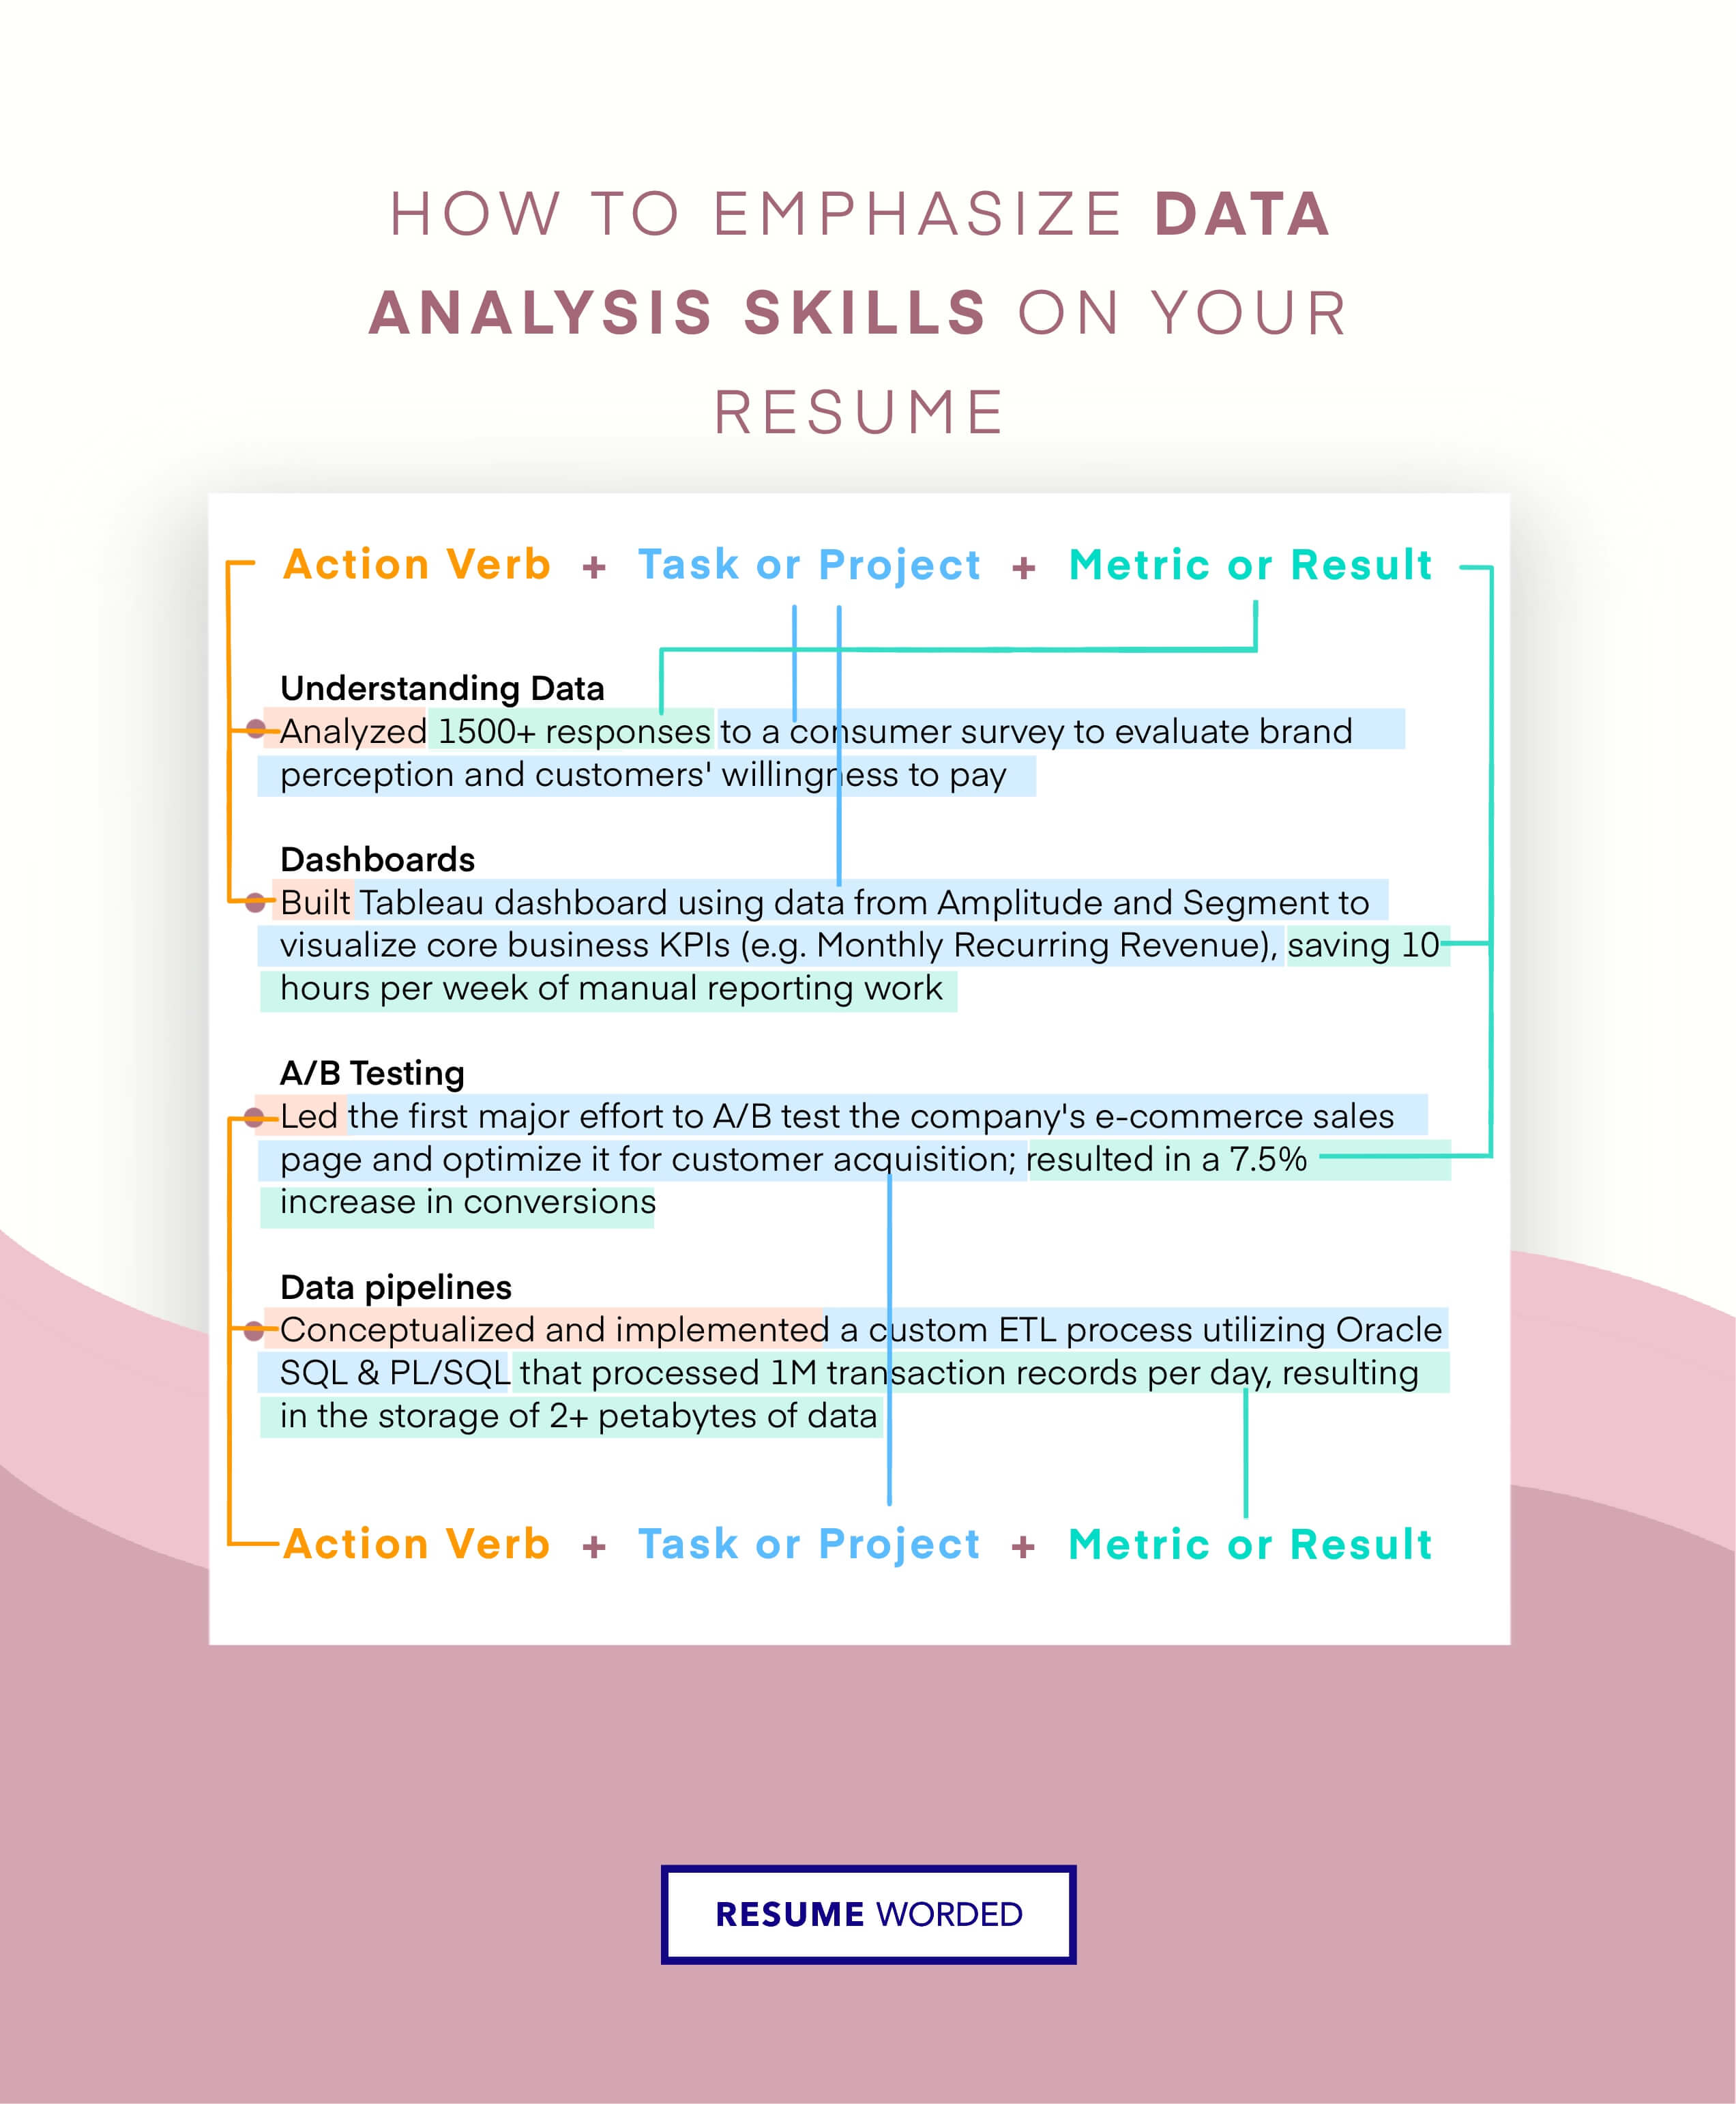 Showcase familiarity with Business Intelligence tools - Entry Level Business Analyst CV